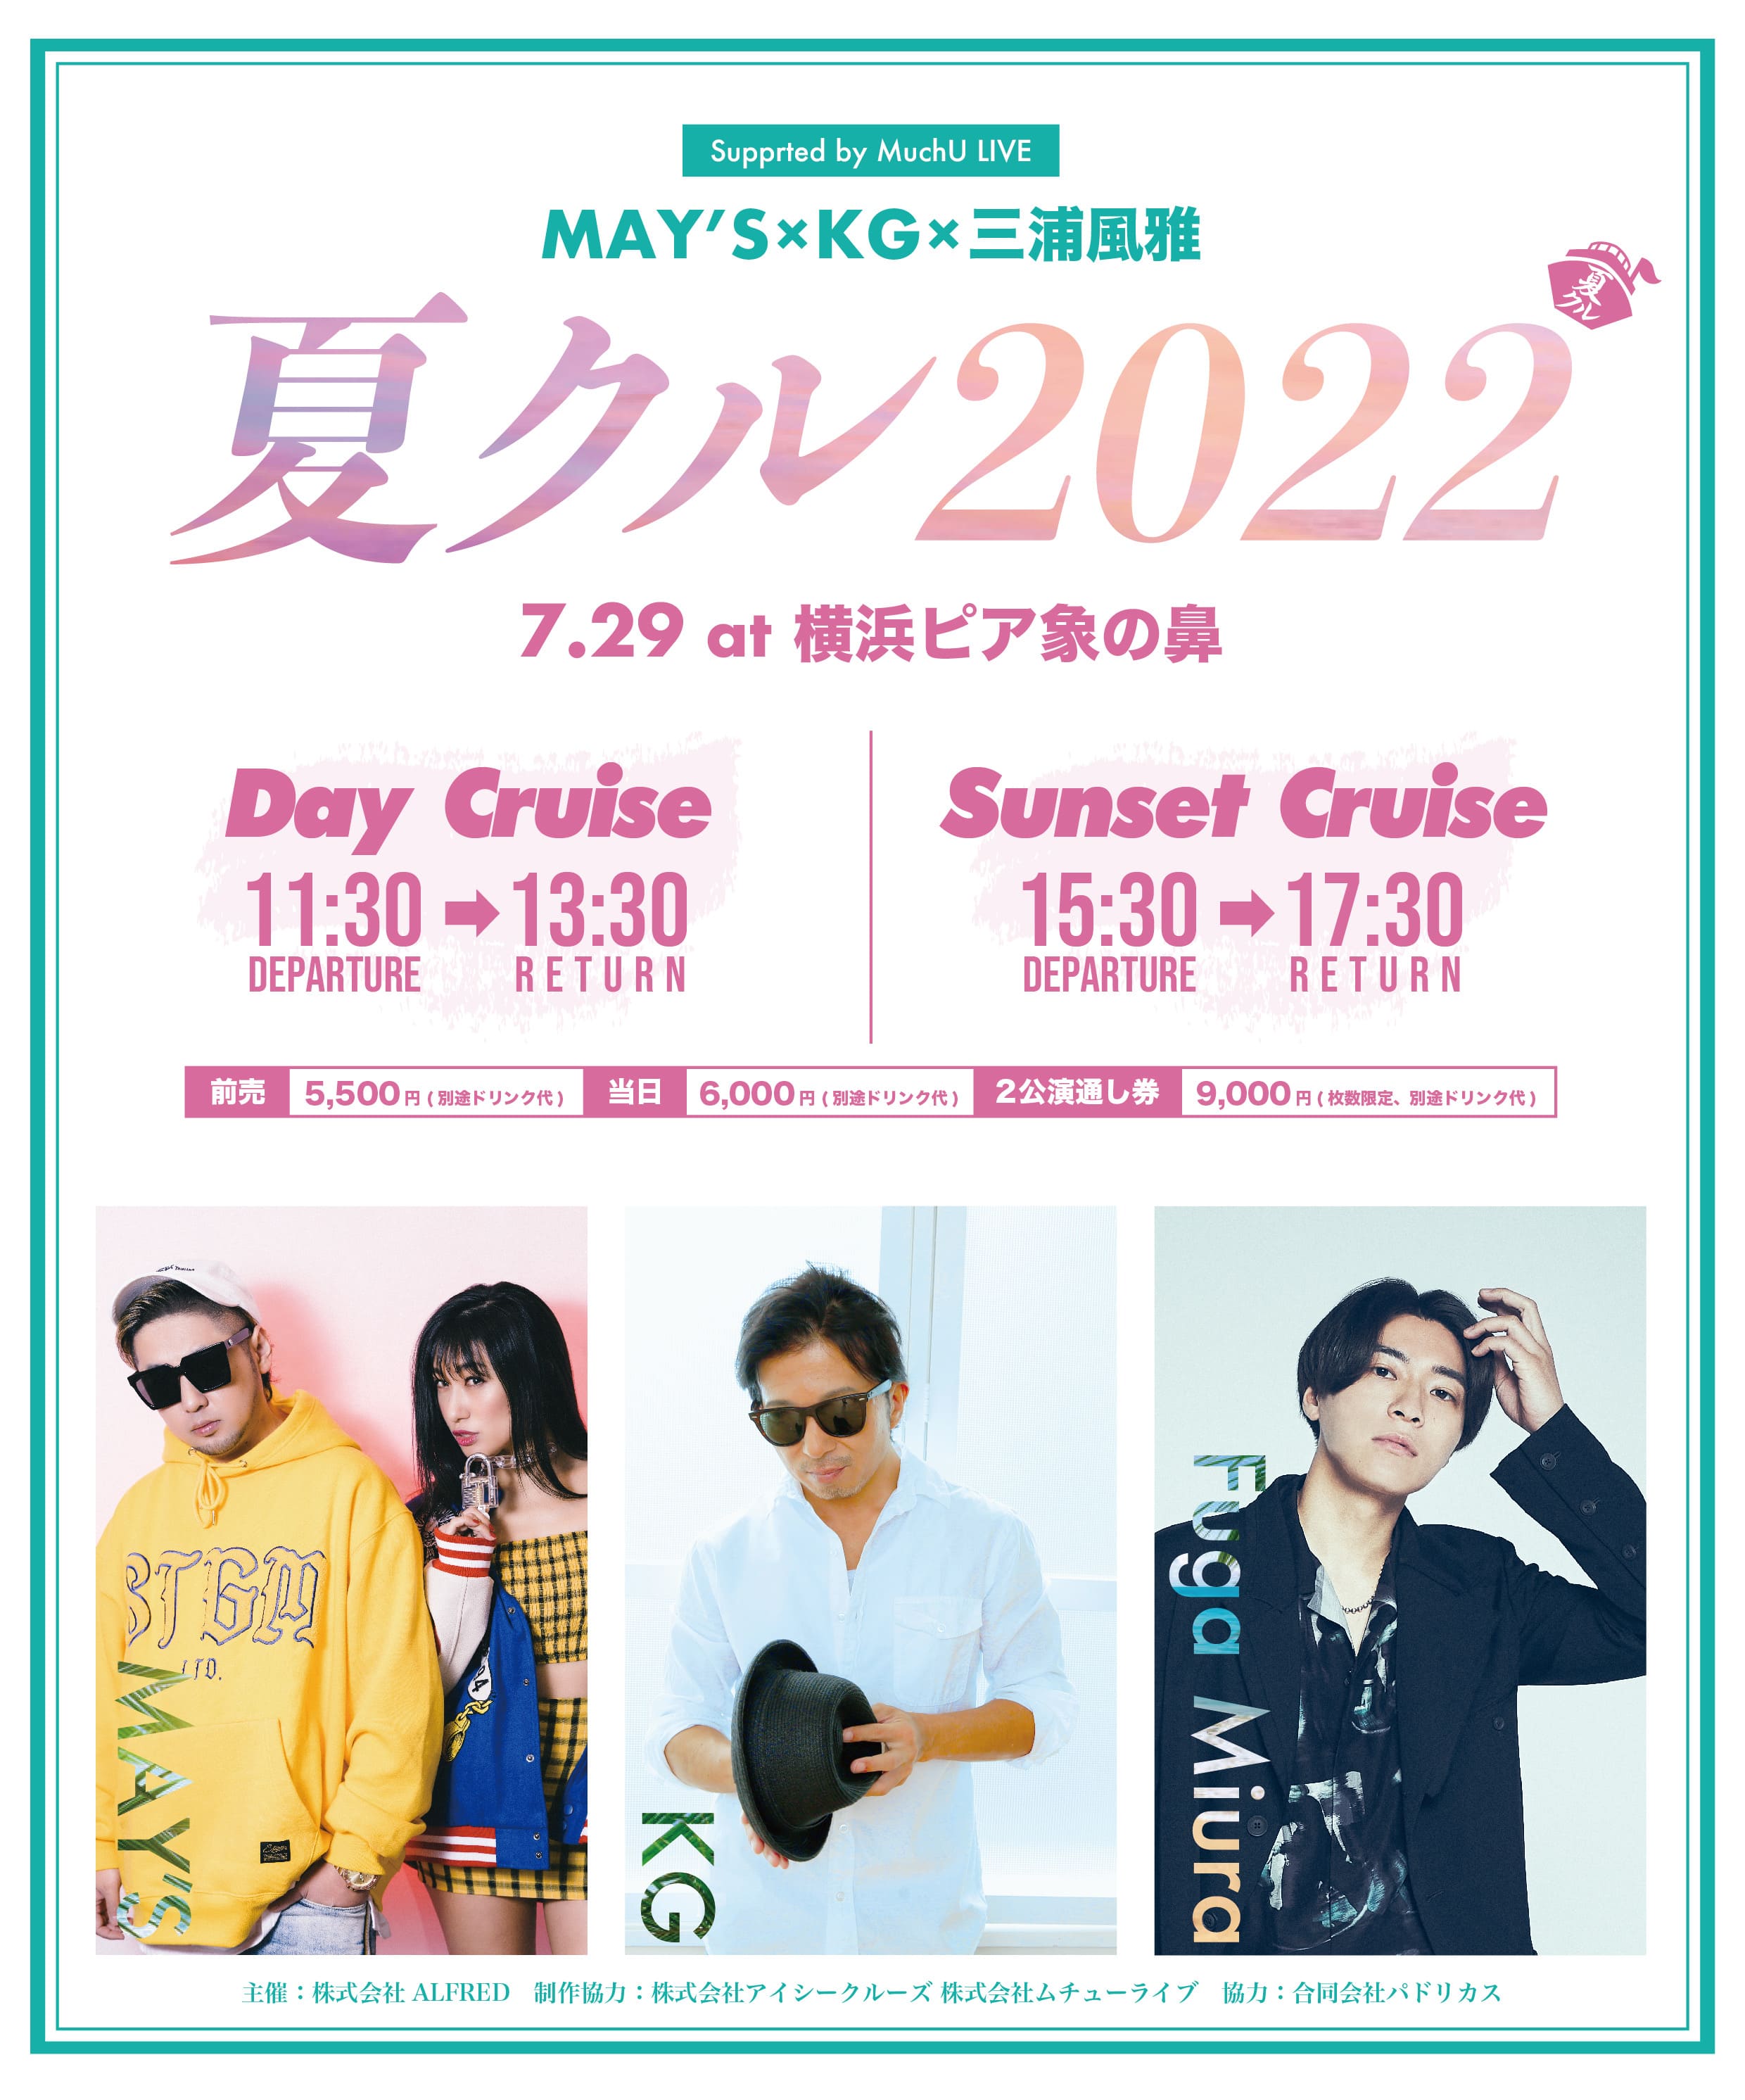 MAY’S，KG，三浦風雅in夏クル2022